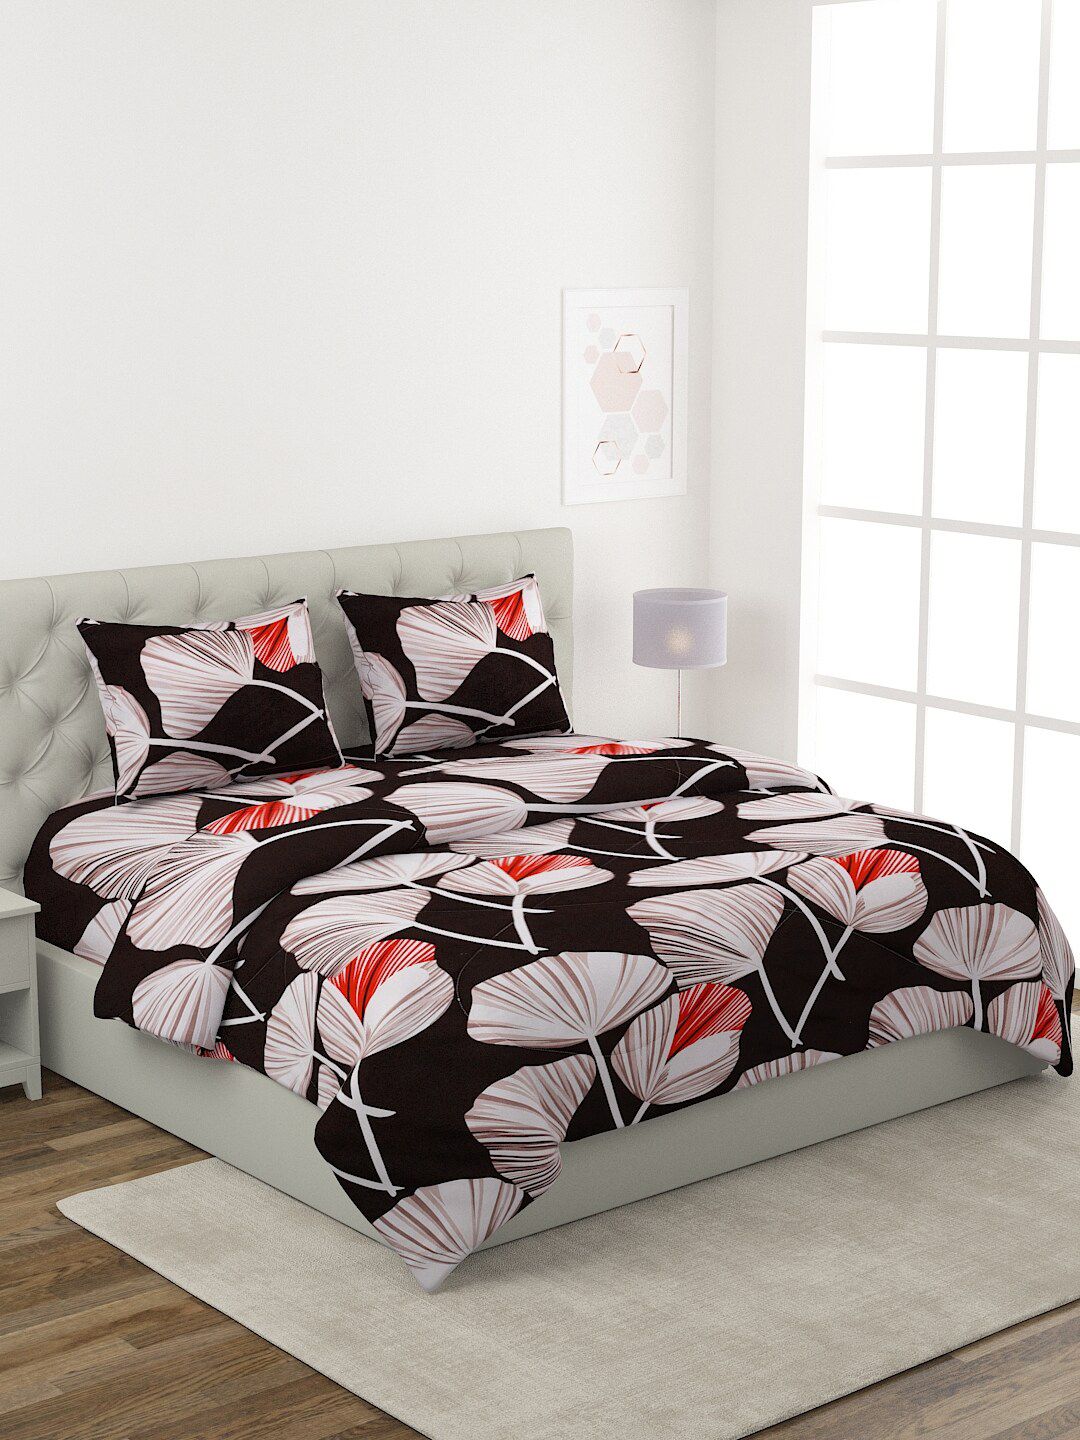 ROMEE Brown & White Printed Pure Cotton Double King Bedding Set Price in India